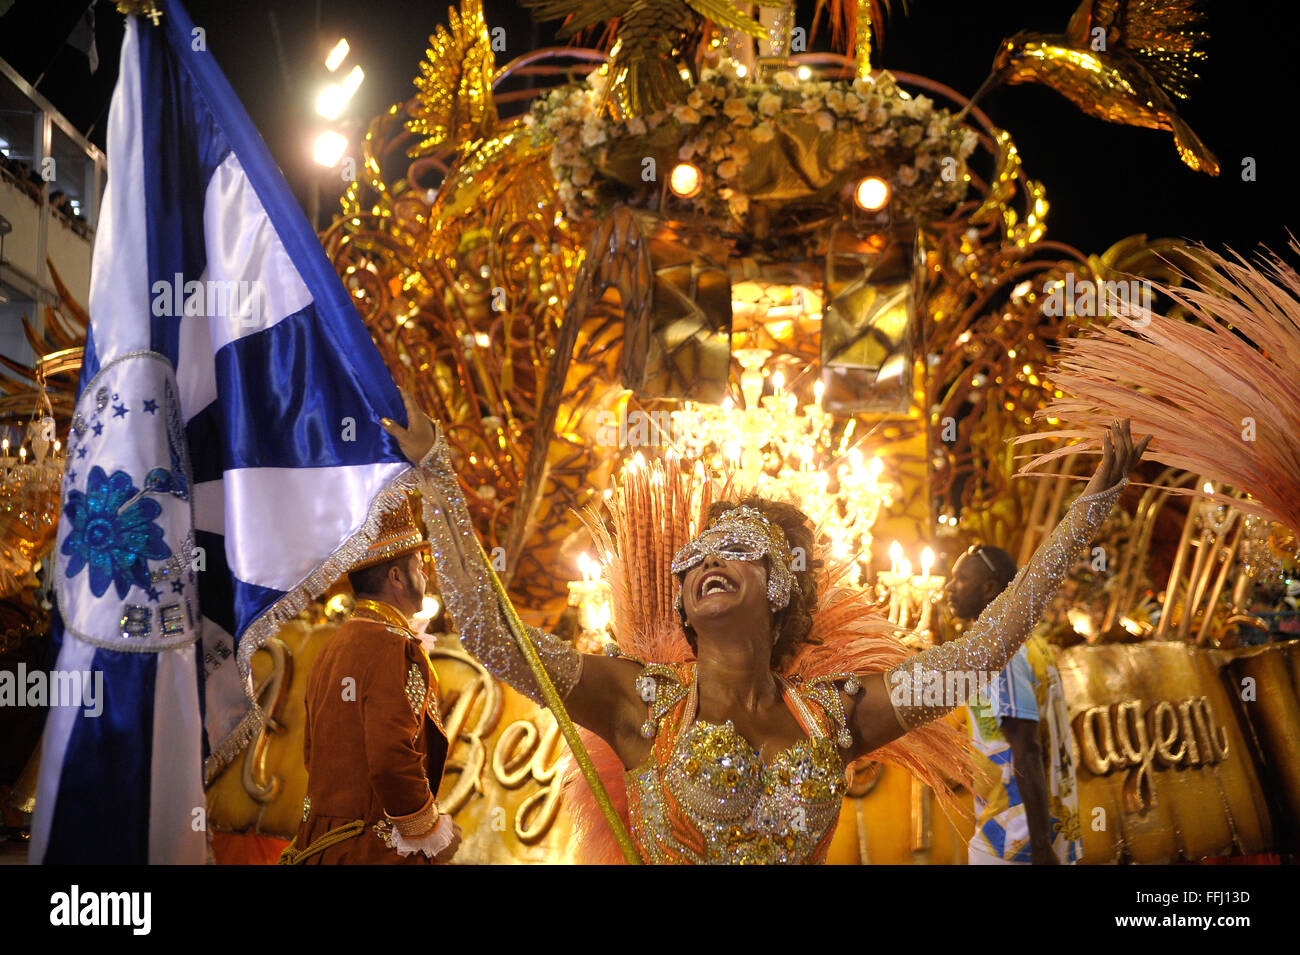 Samba school dancers perform during the Carnival Access Group